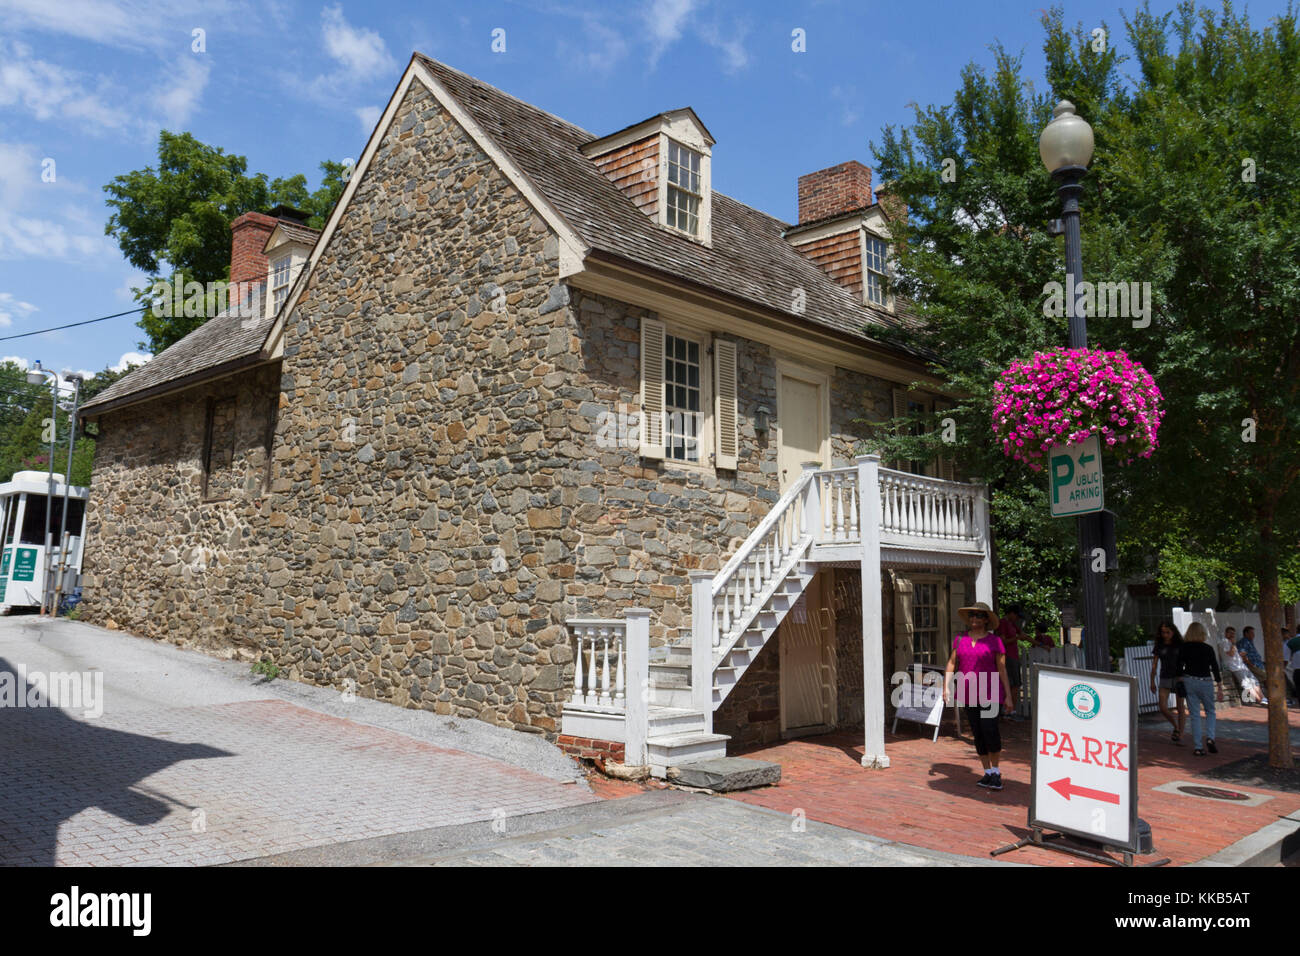 The Old Stone House (the oldest unchanged building in Washington) on M St NW in historic Georgetown, Washington DC, United States. Stock Photo